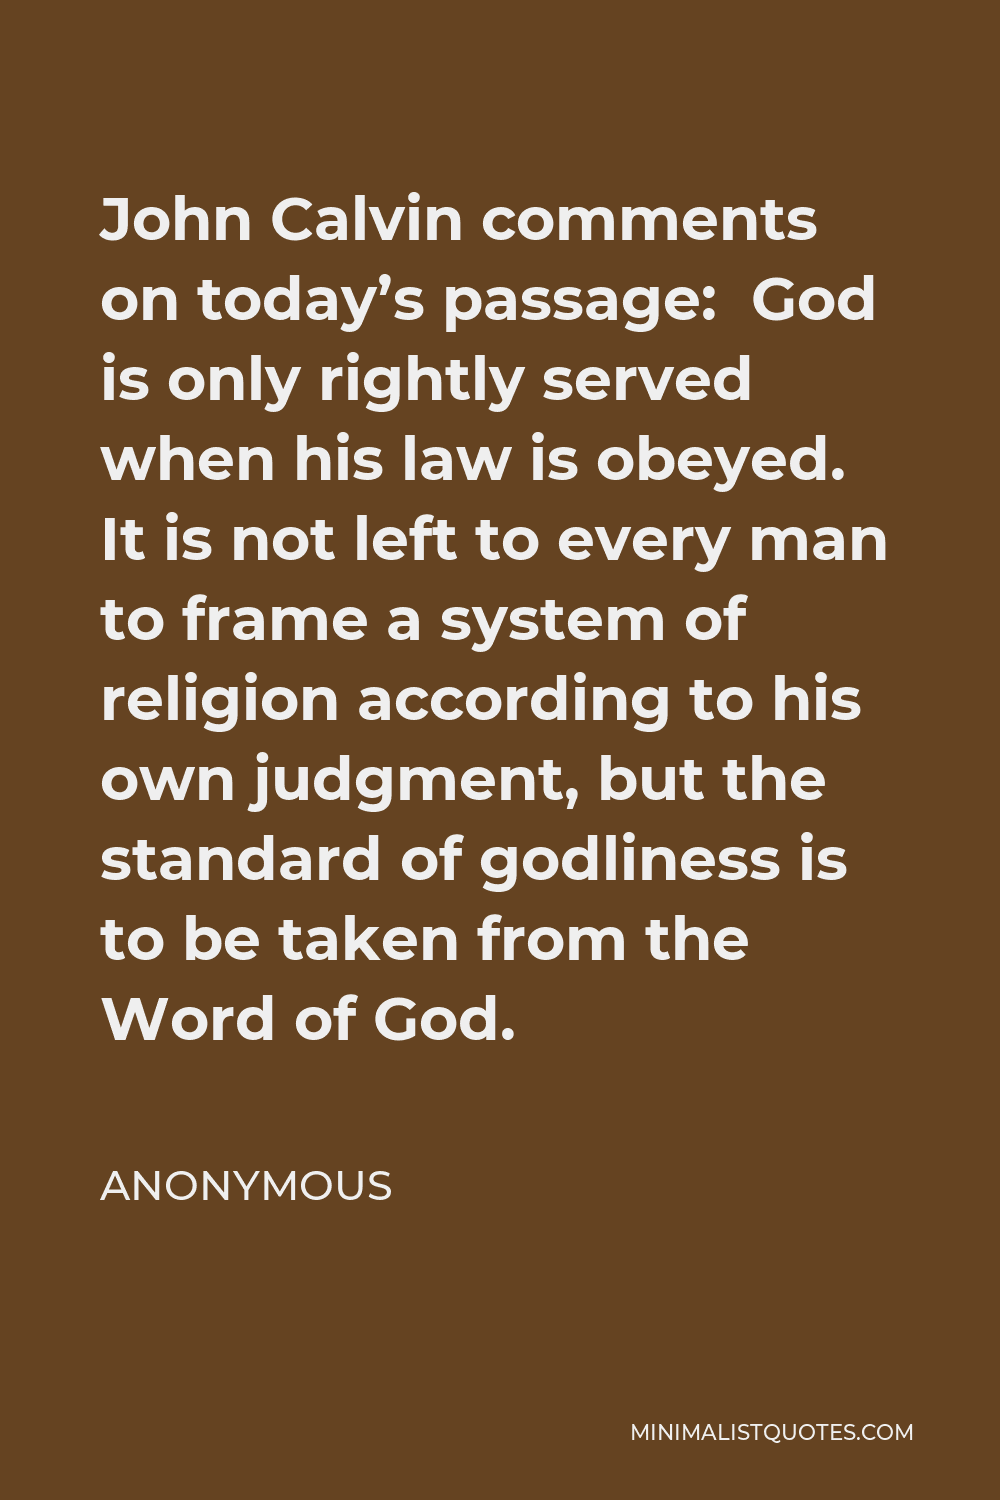 Anonymous Quote - John Calvin comments on today’s passage: God is only rightly served when his law is obeyed. It is not left to every man to frame a system of religion according to his own judgment, but the standard of godliness is to be taken from the Word of God.